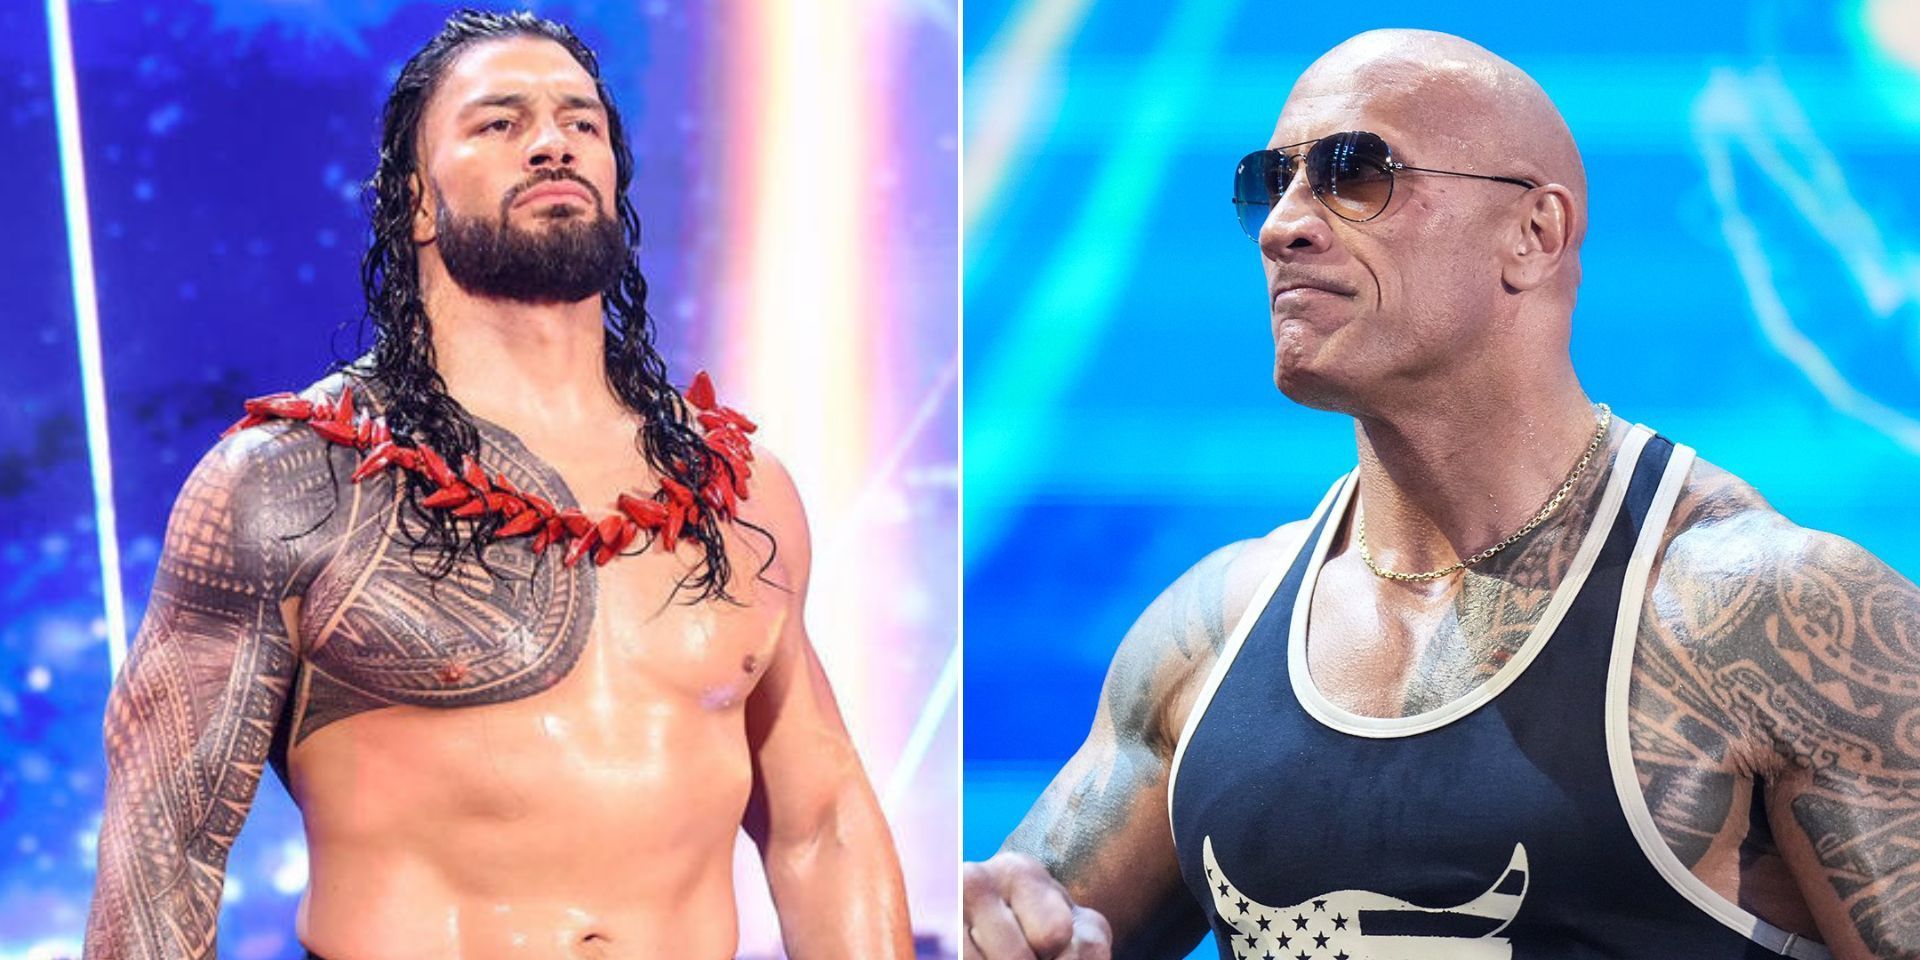 Could Roman Reigns vs. The Rock take place at WrestleMania 40?